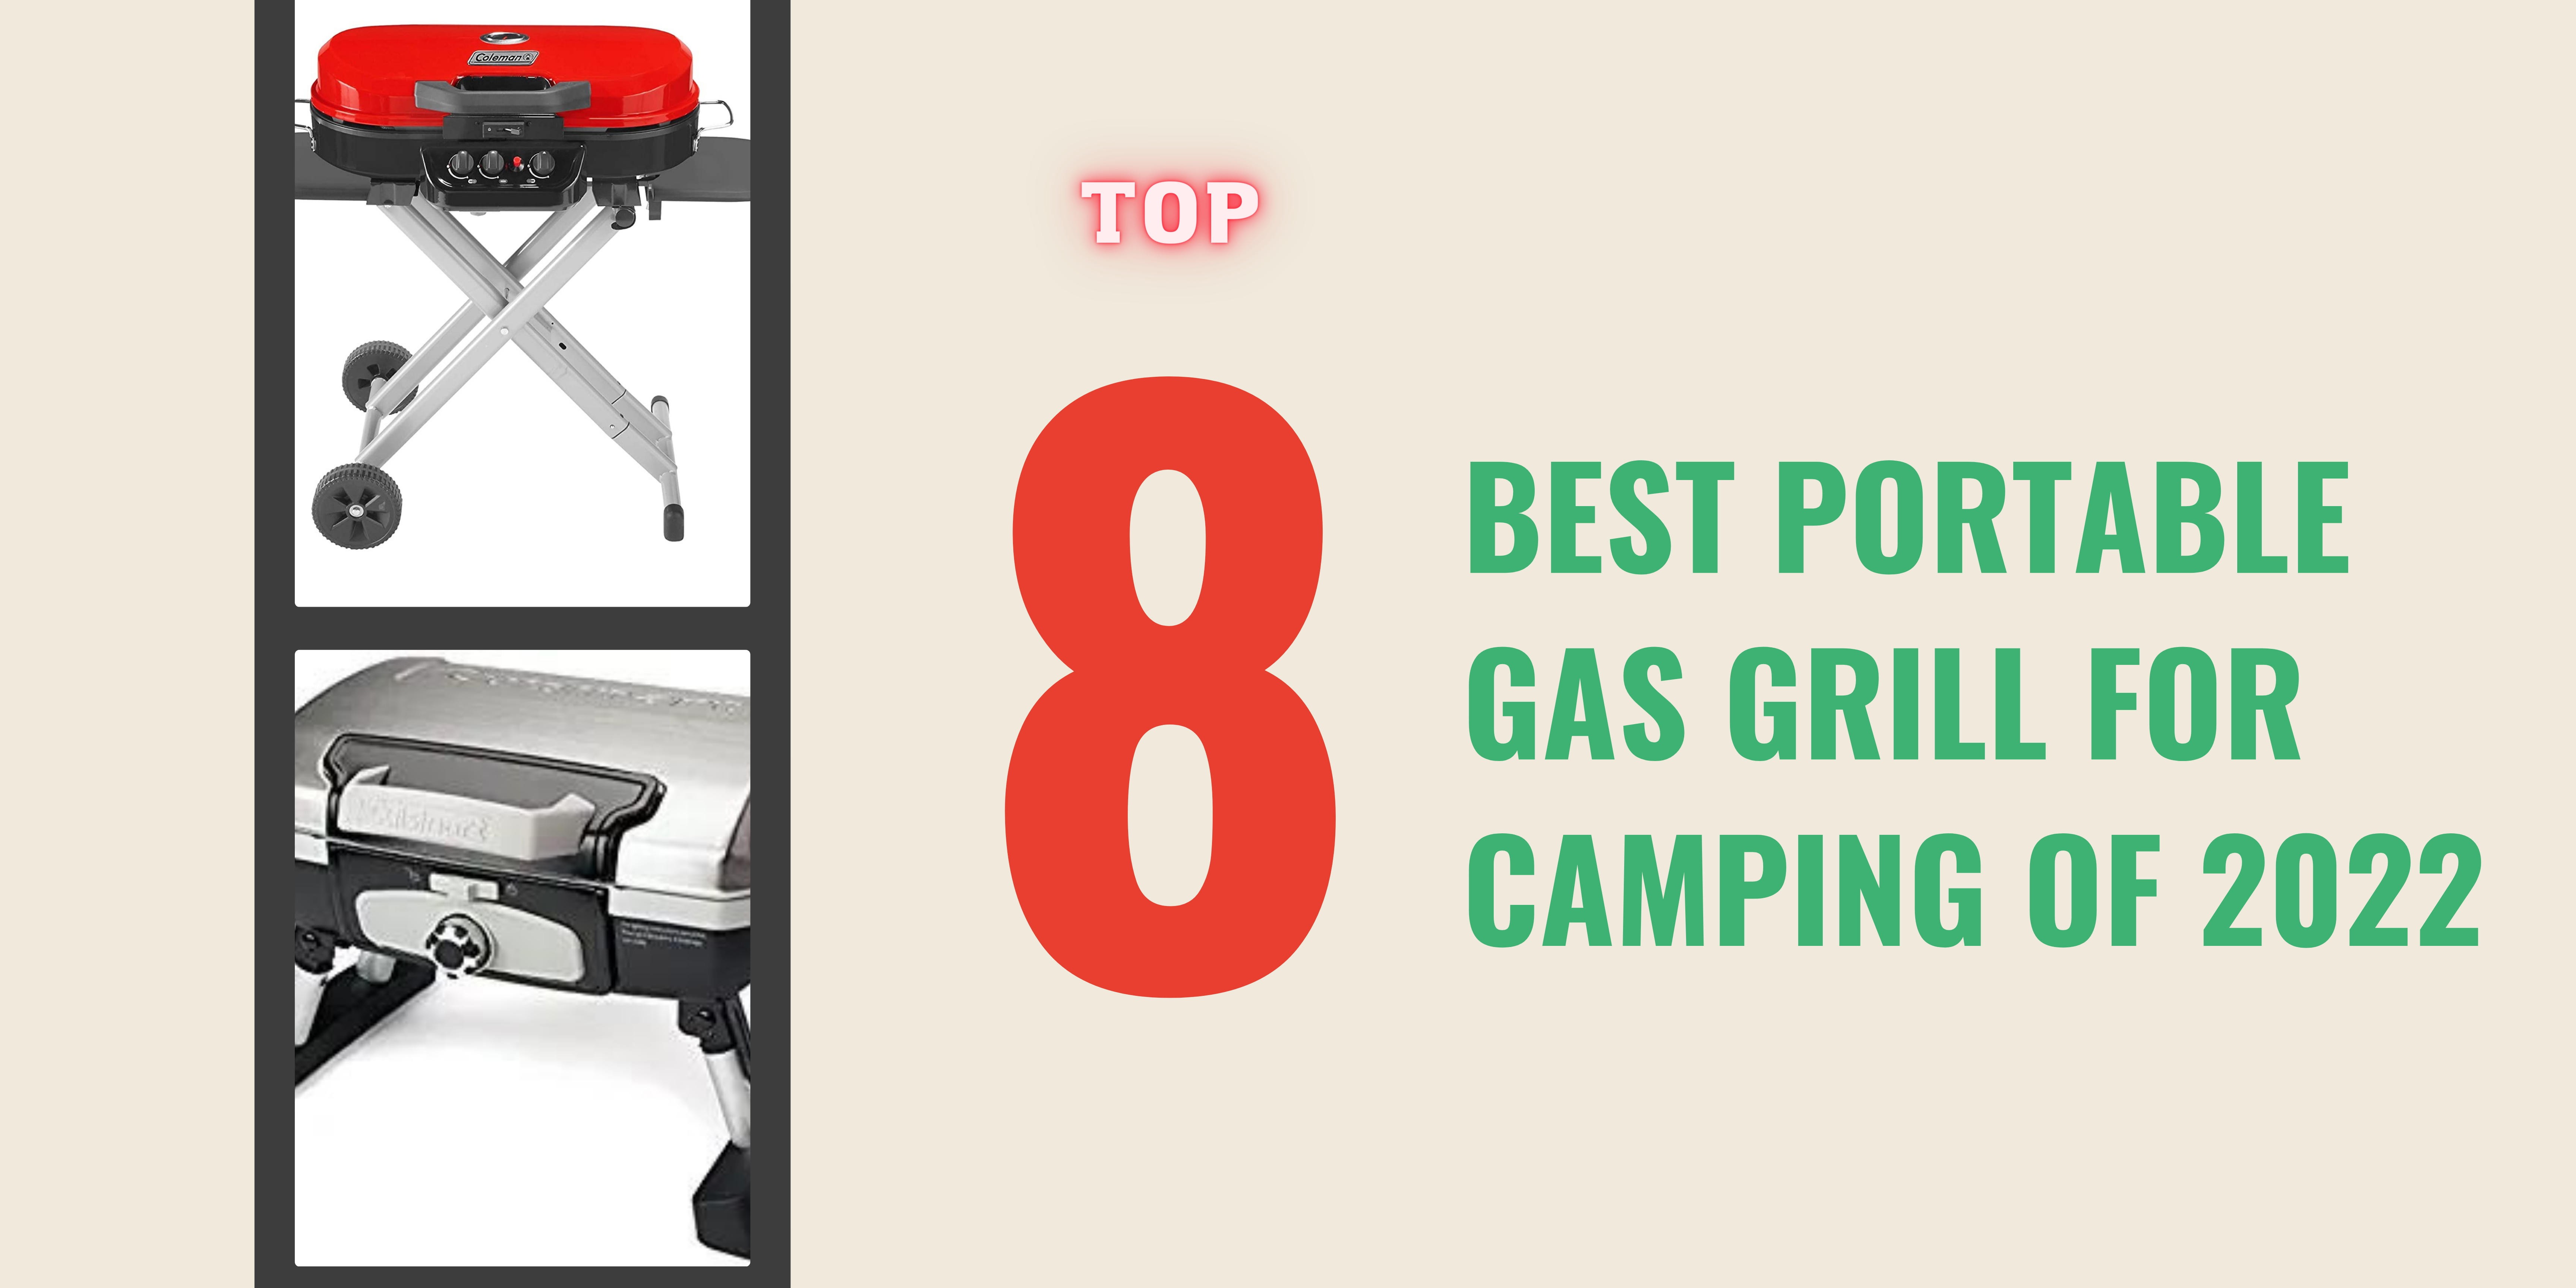 THE 8 BEST PORTABLE GAS GRILL FOR CAMPING OF 2022